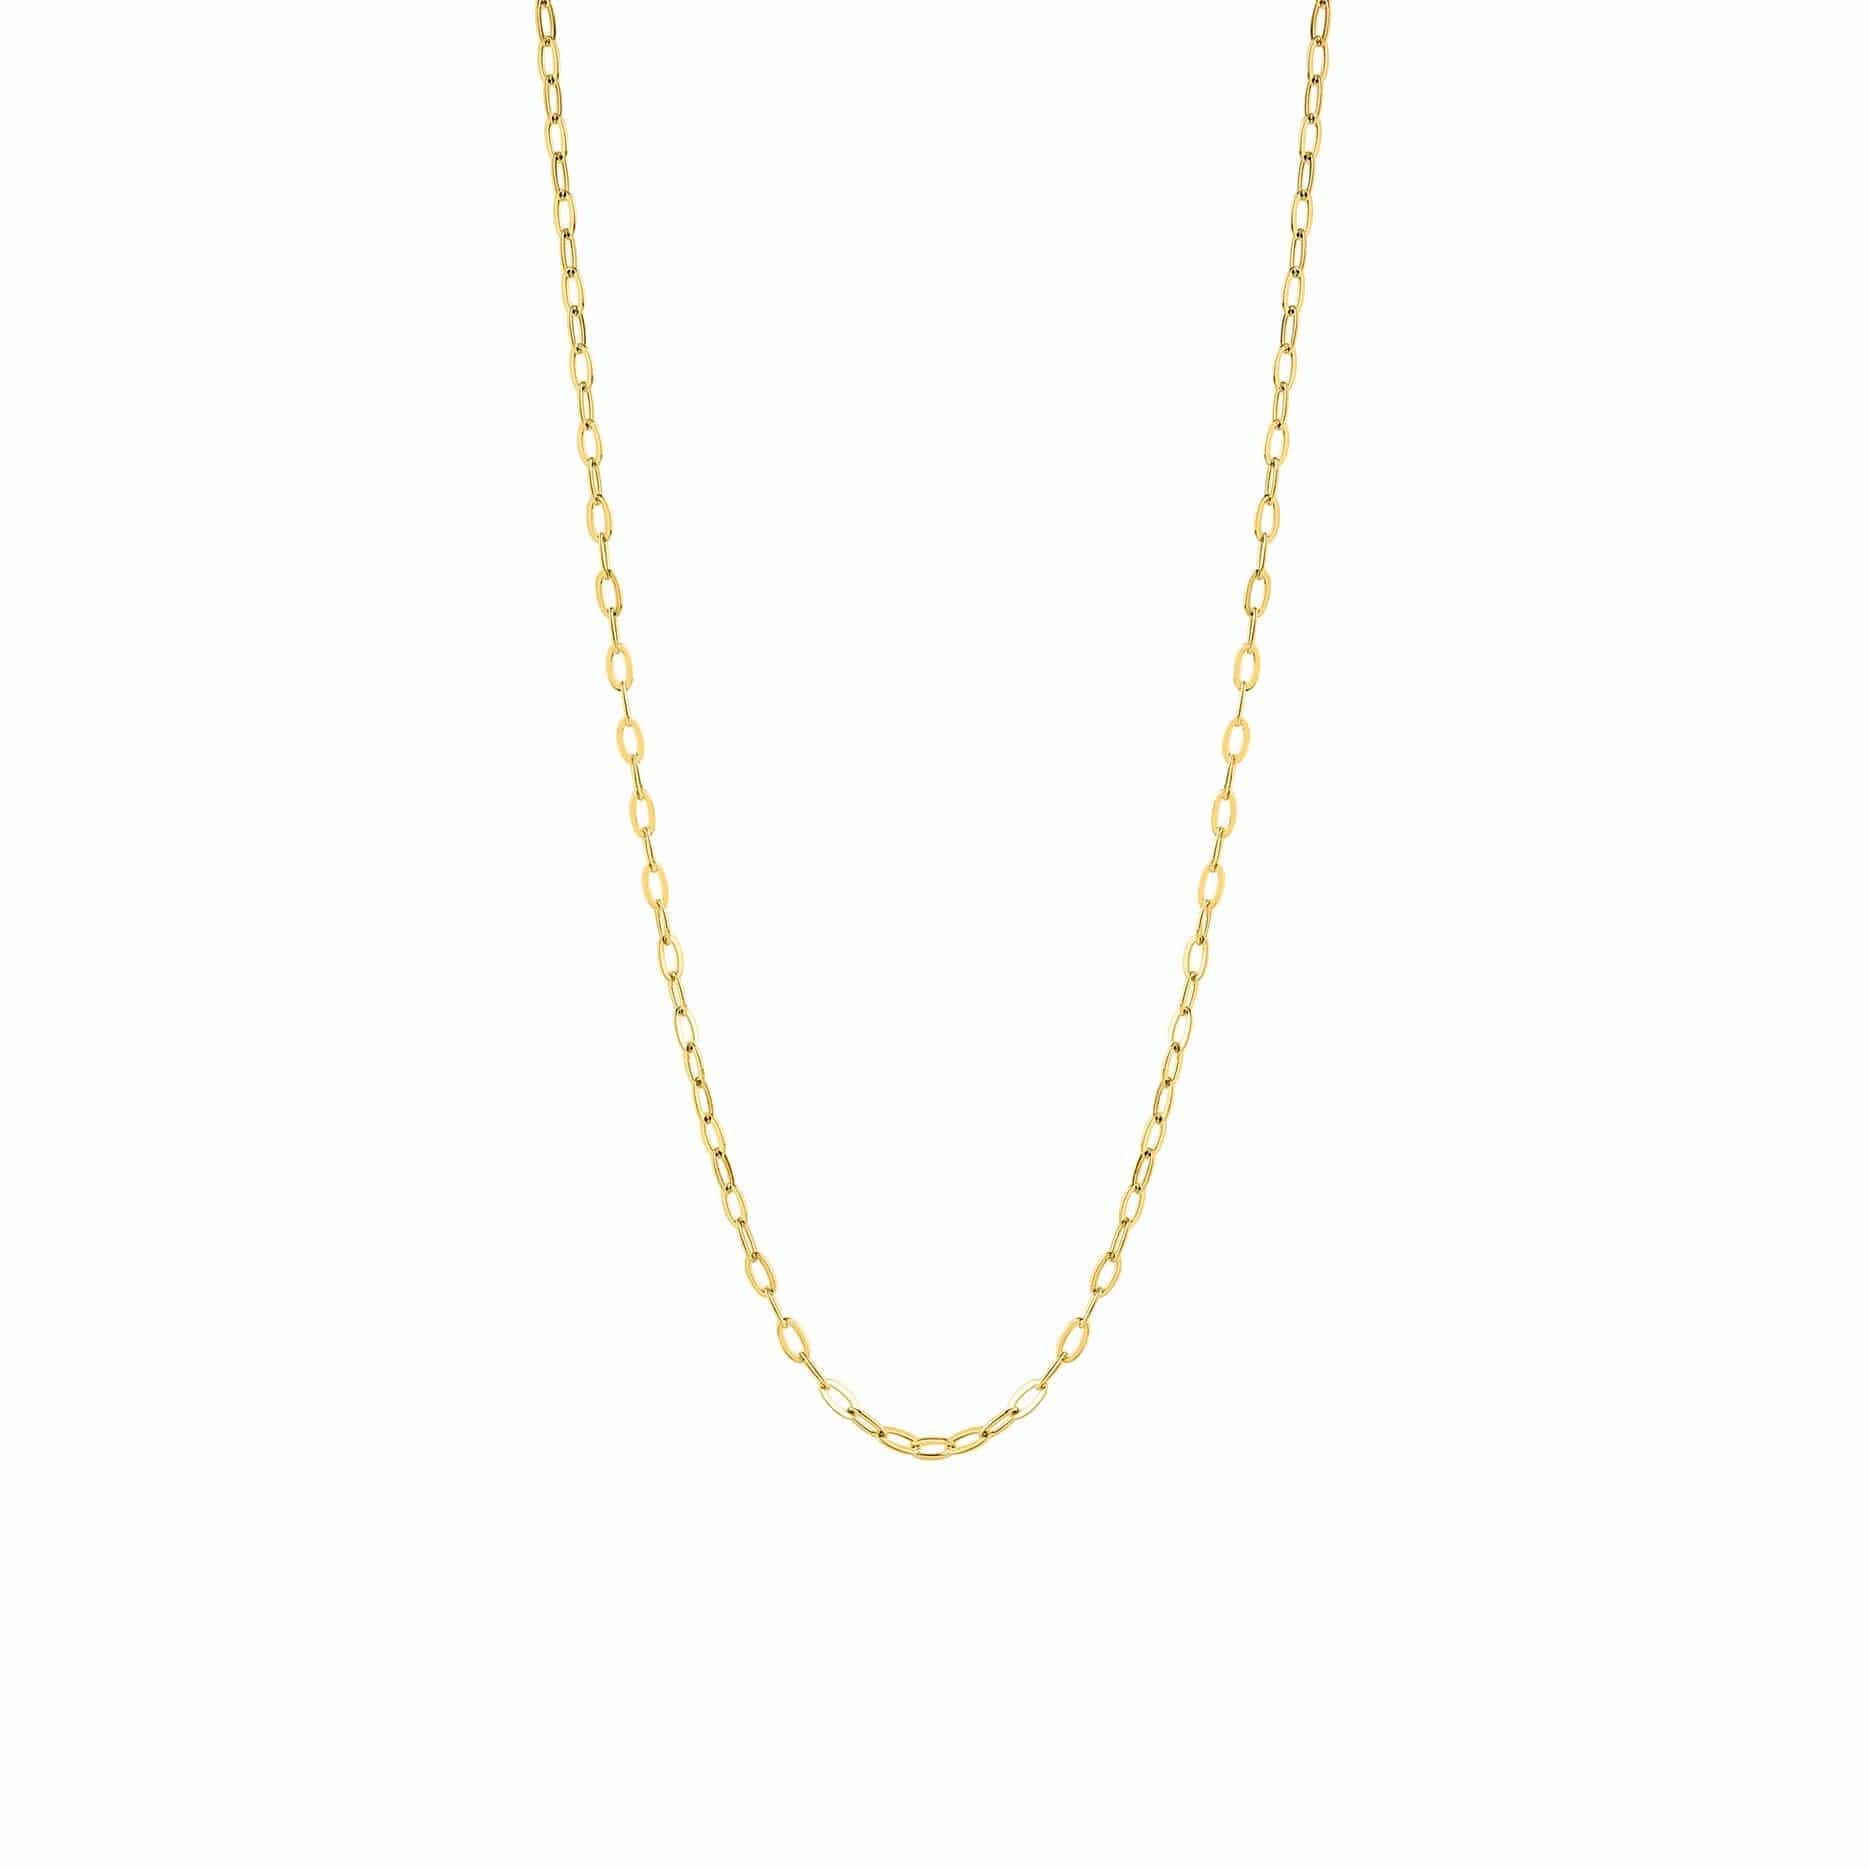 gold plated necklace with short link